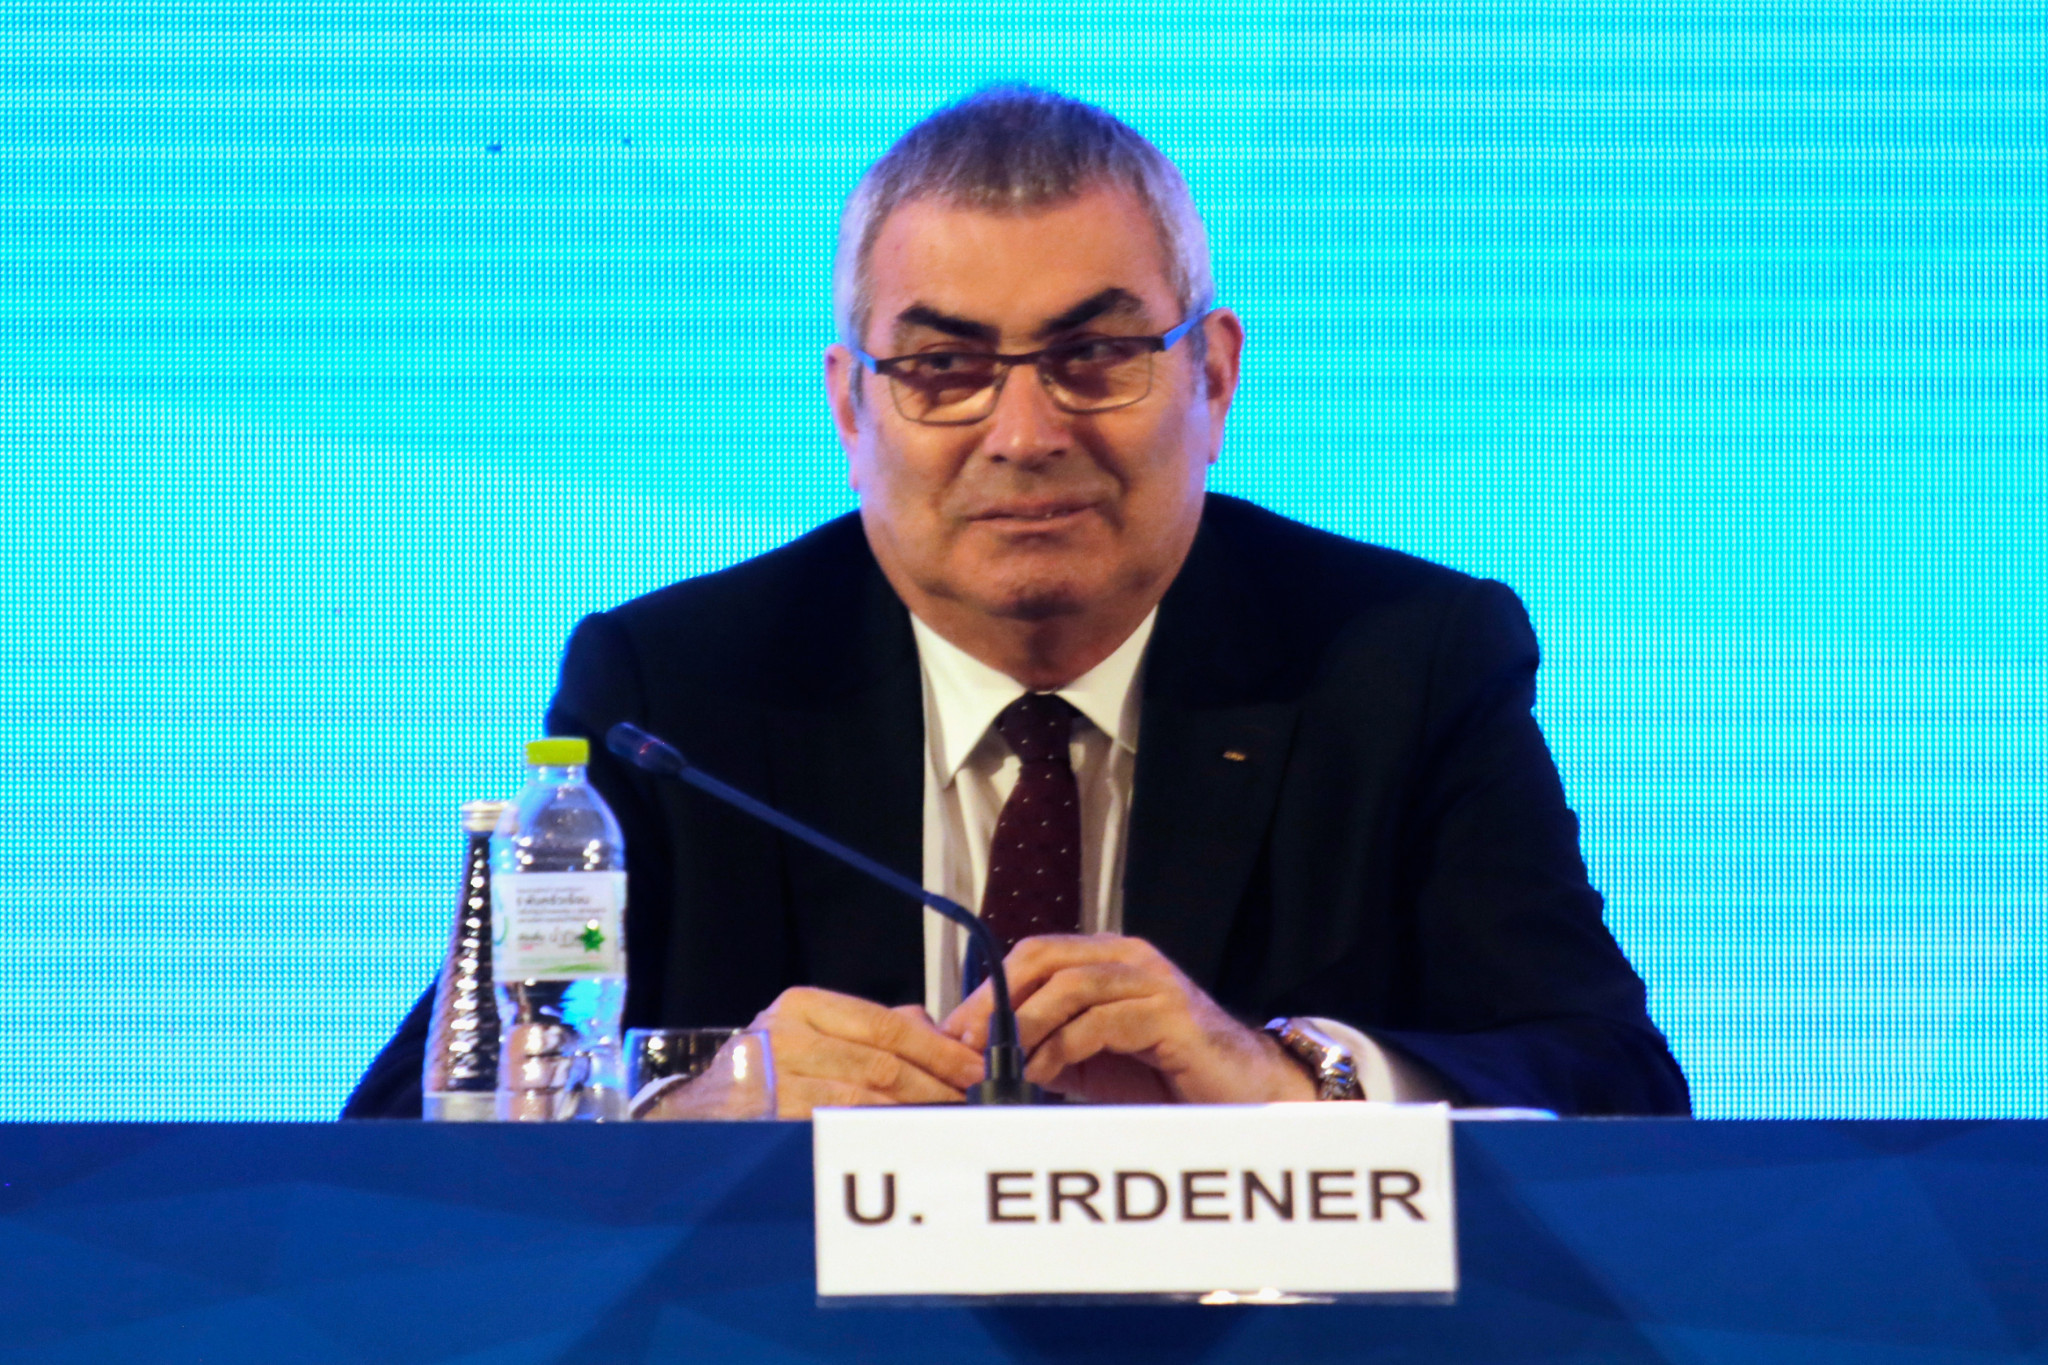 Uğur Erdener is the current World Archery President ©Getty Images